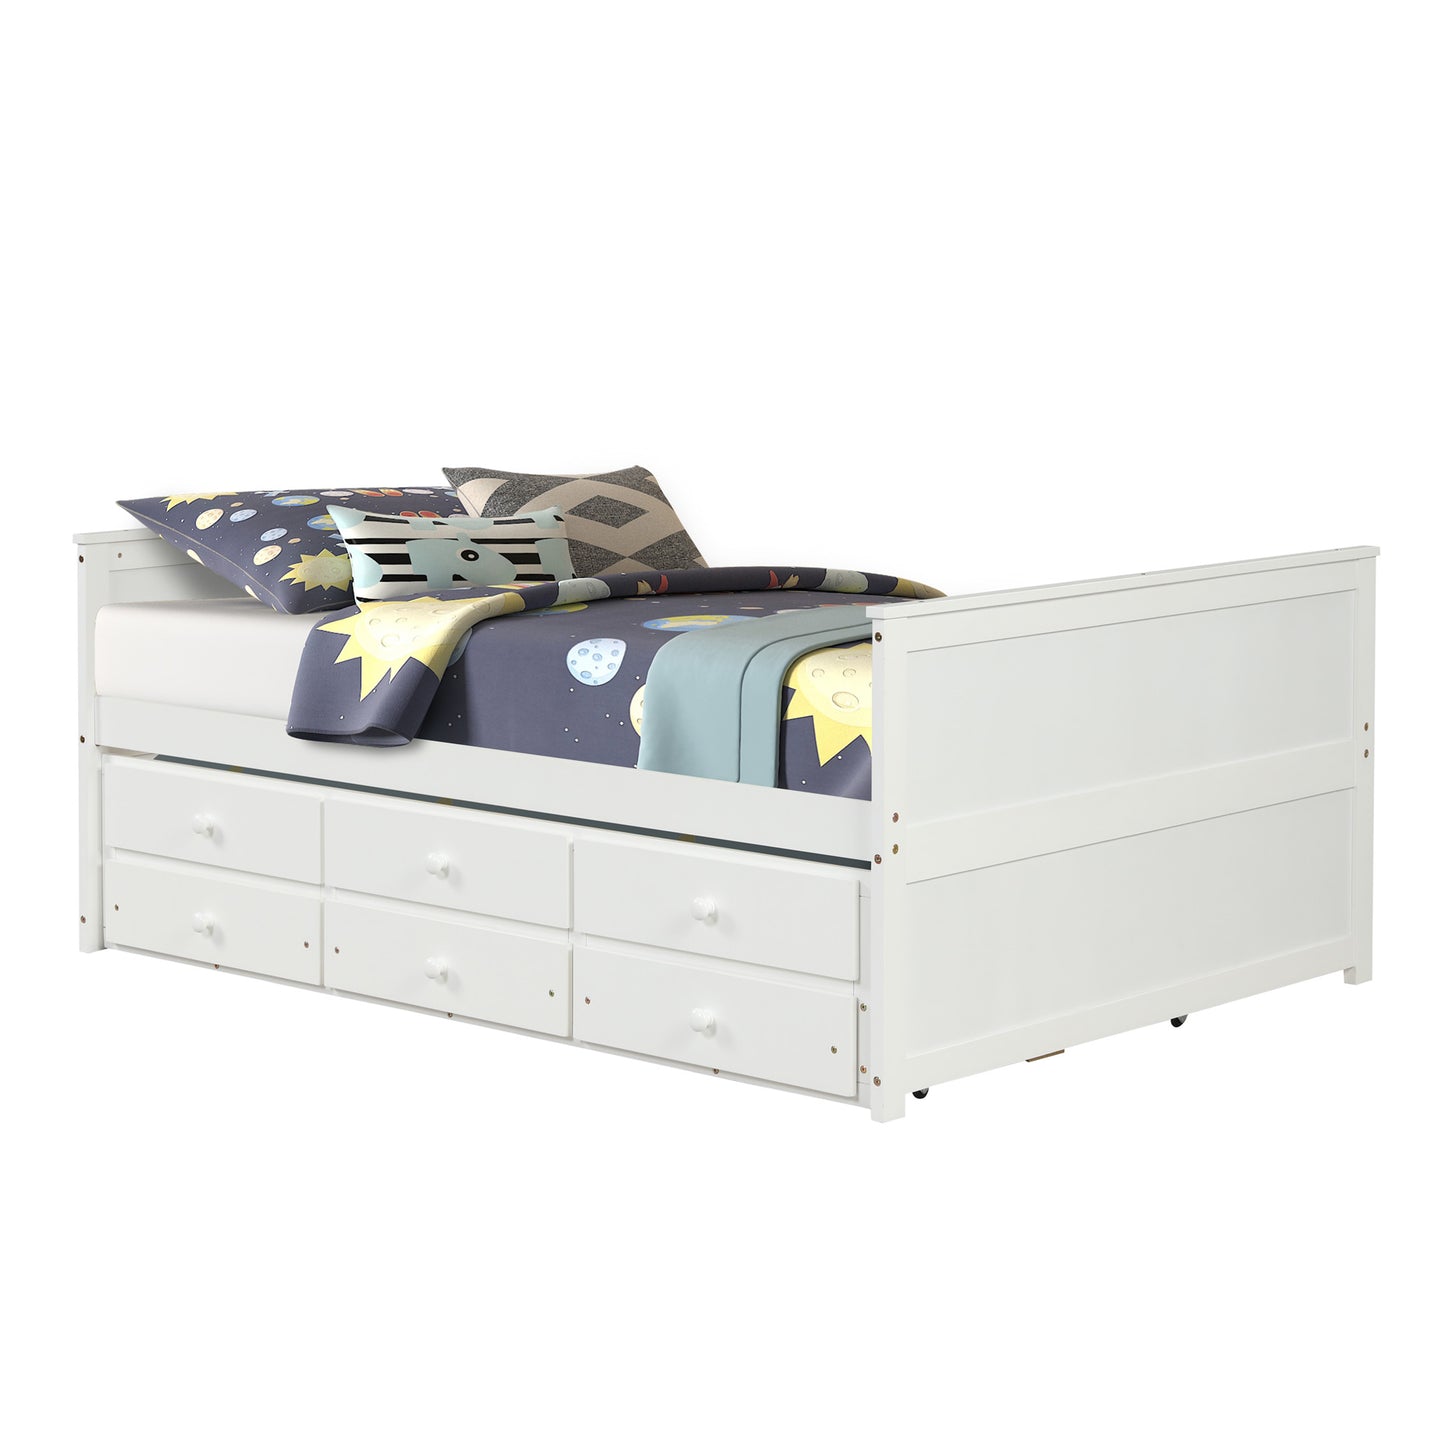 SYNGAR Bed Frame with Storage, Full Platform Bed with Trundle and 3 Storage Drawers for Kids Teens Adult, White, LJ2569